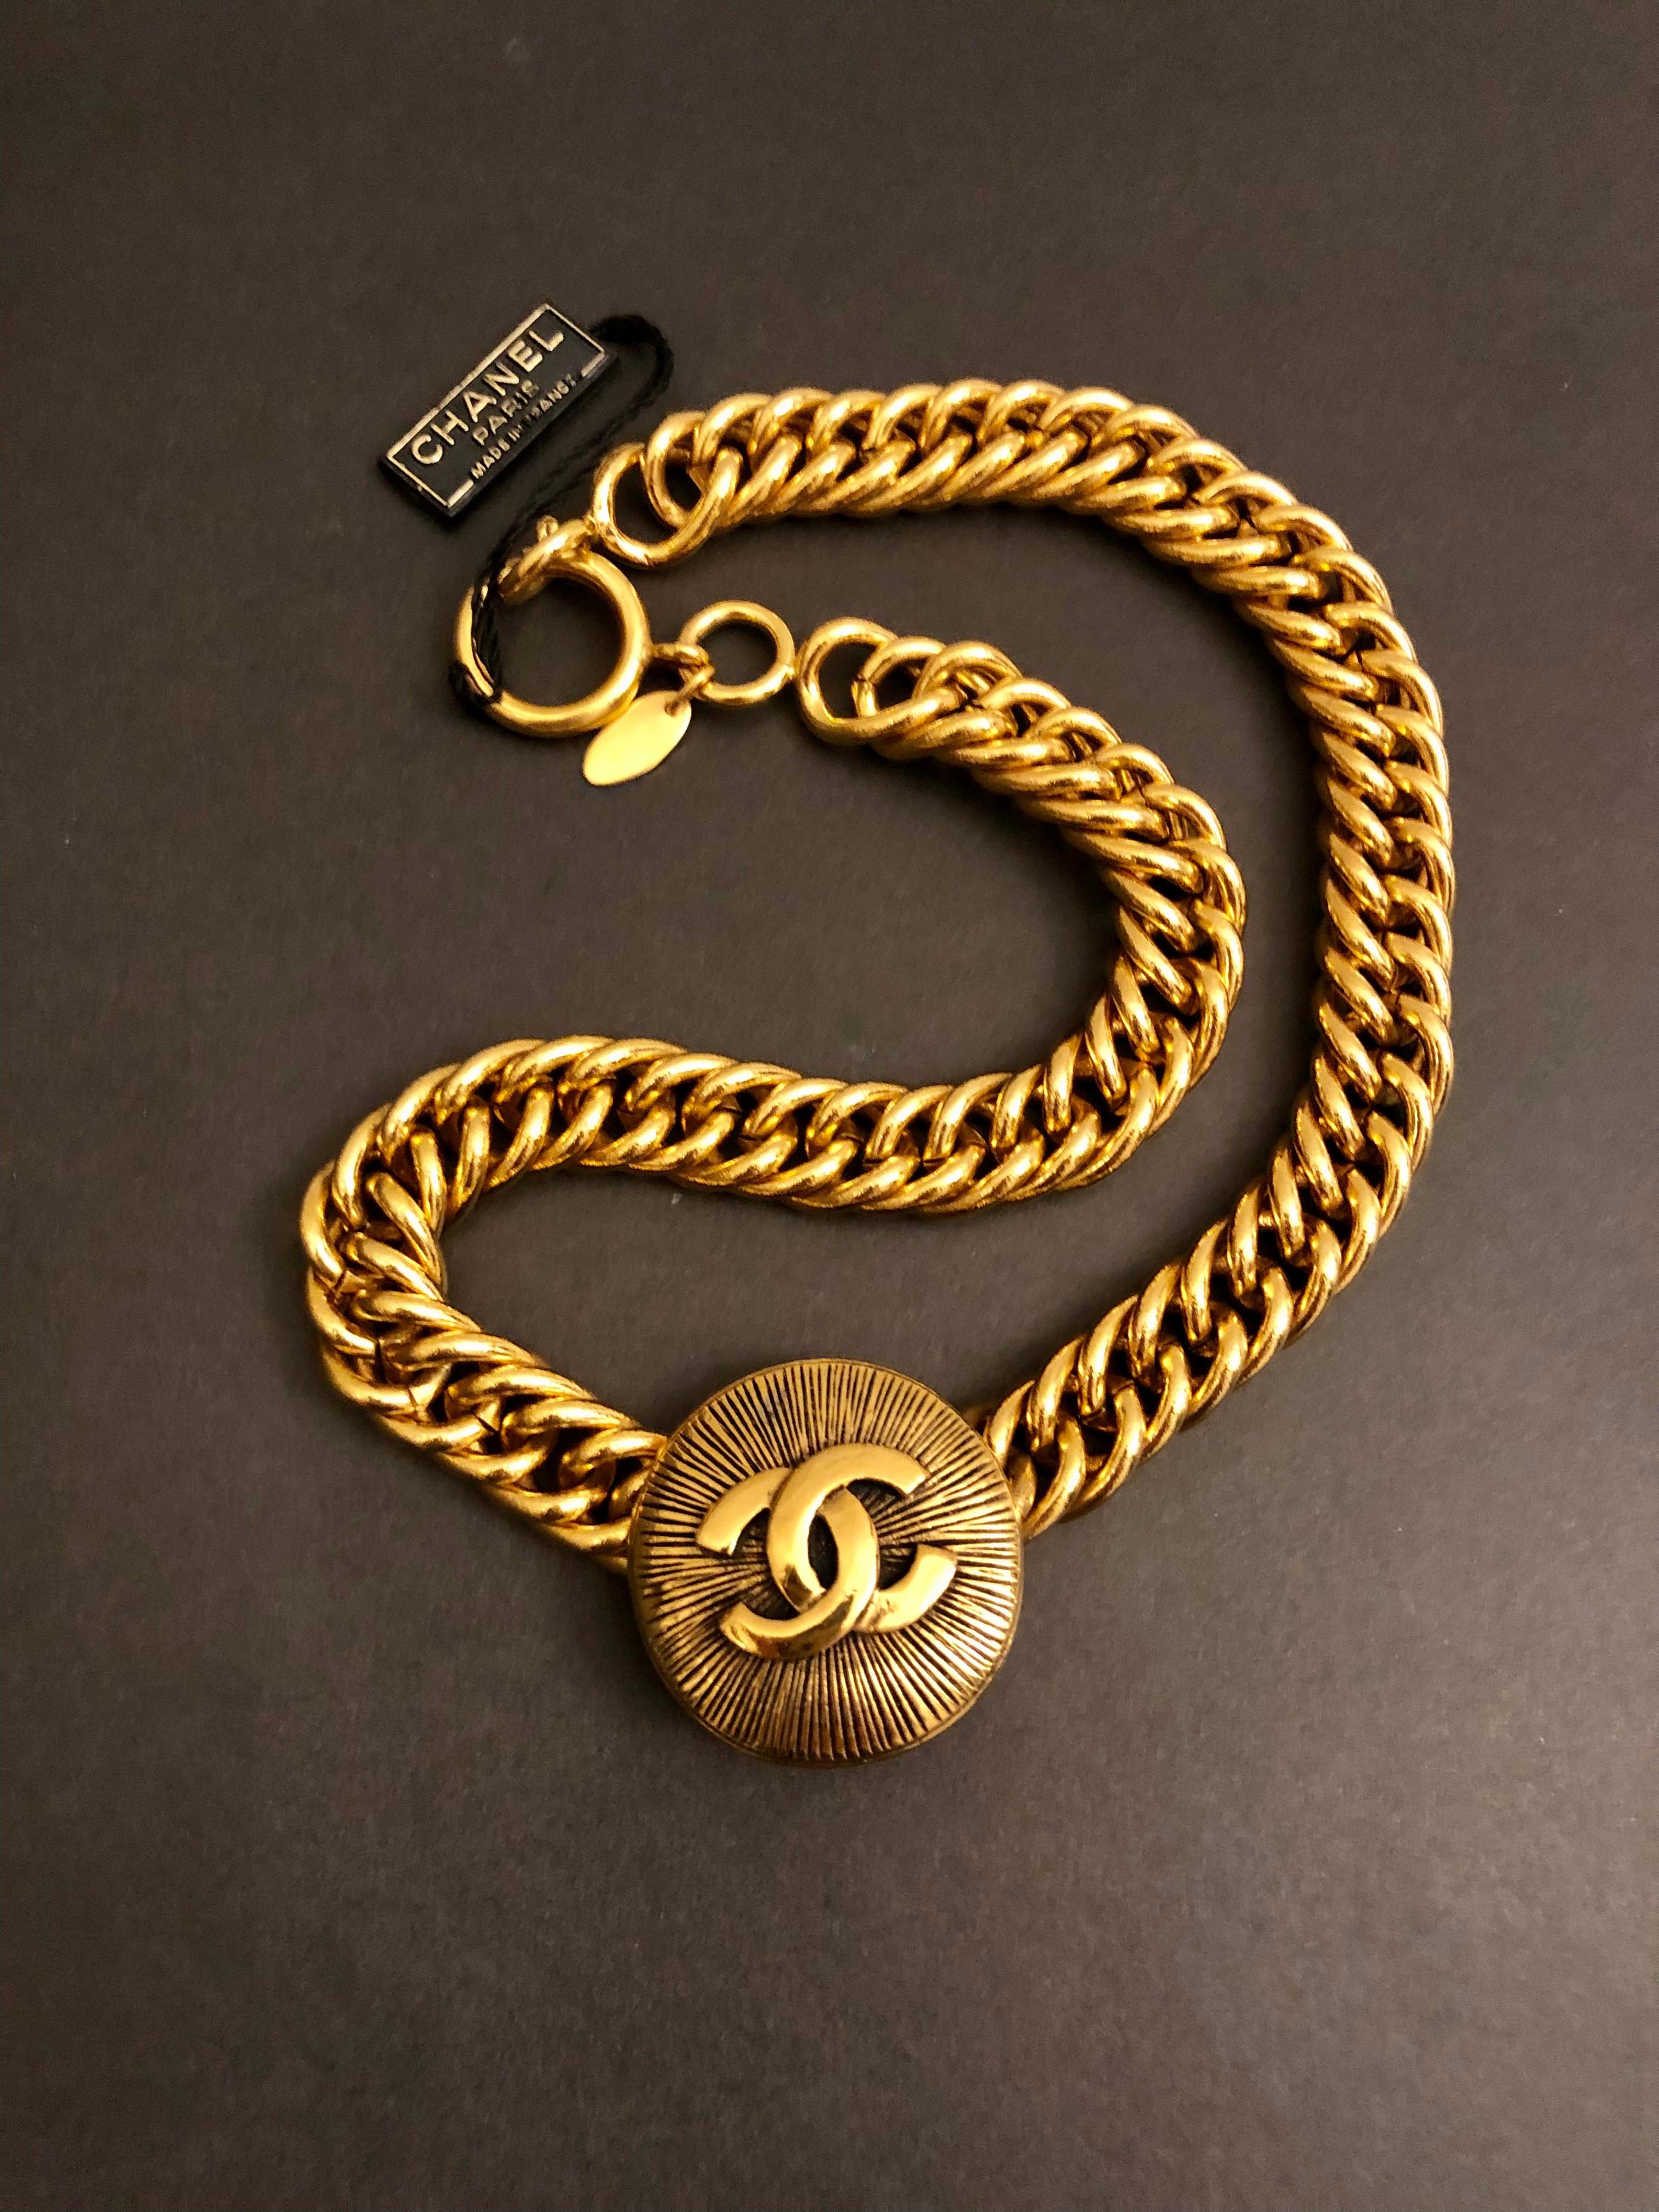 This vintage CHANEL short chain necklace is crafted of sturdy gold toned chain centered a Byzantine CC coin charm. Measures approximately 42 cm Coin 3.2 cm in diameter. Stamped Chanel made in France. Spring ring closure. Comes with box and